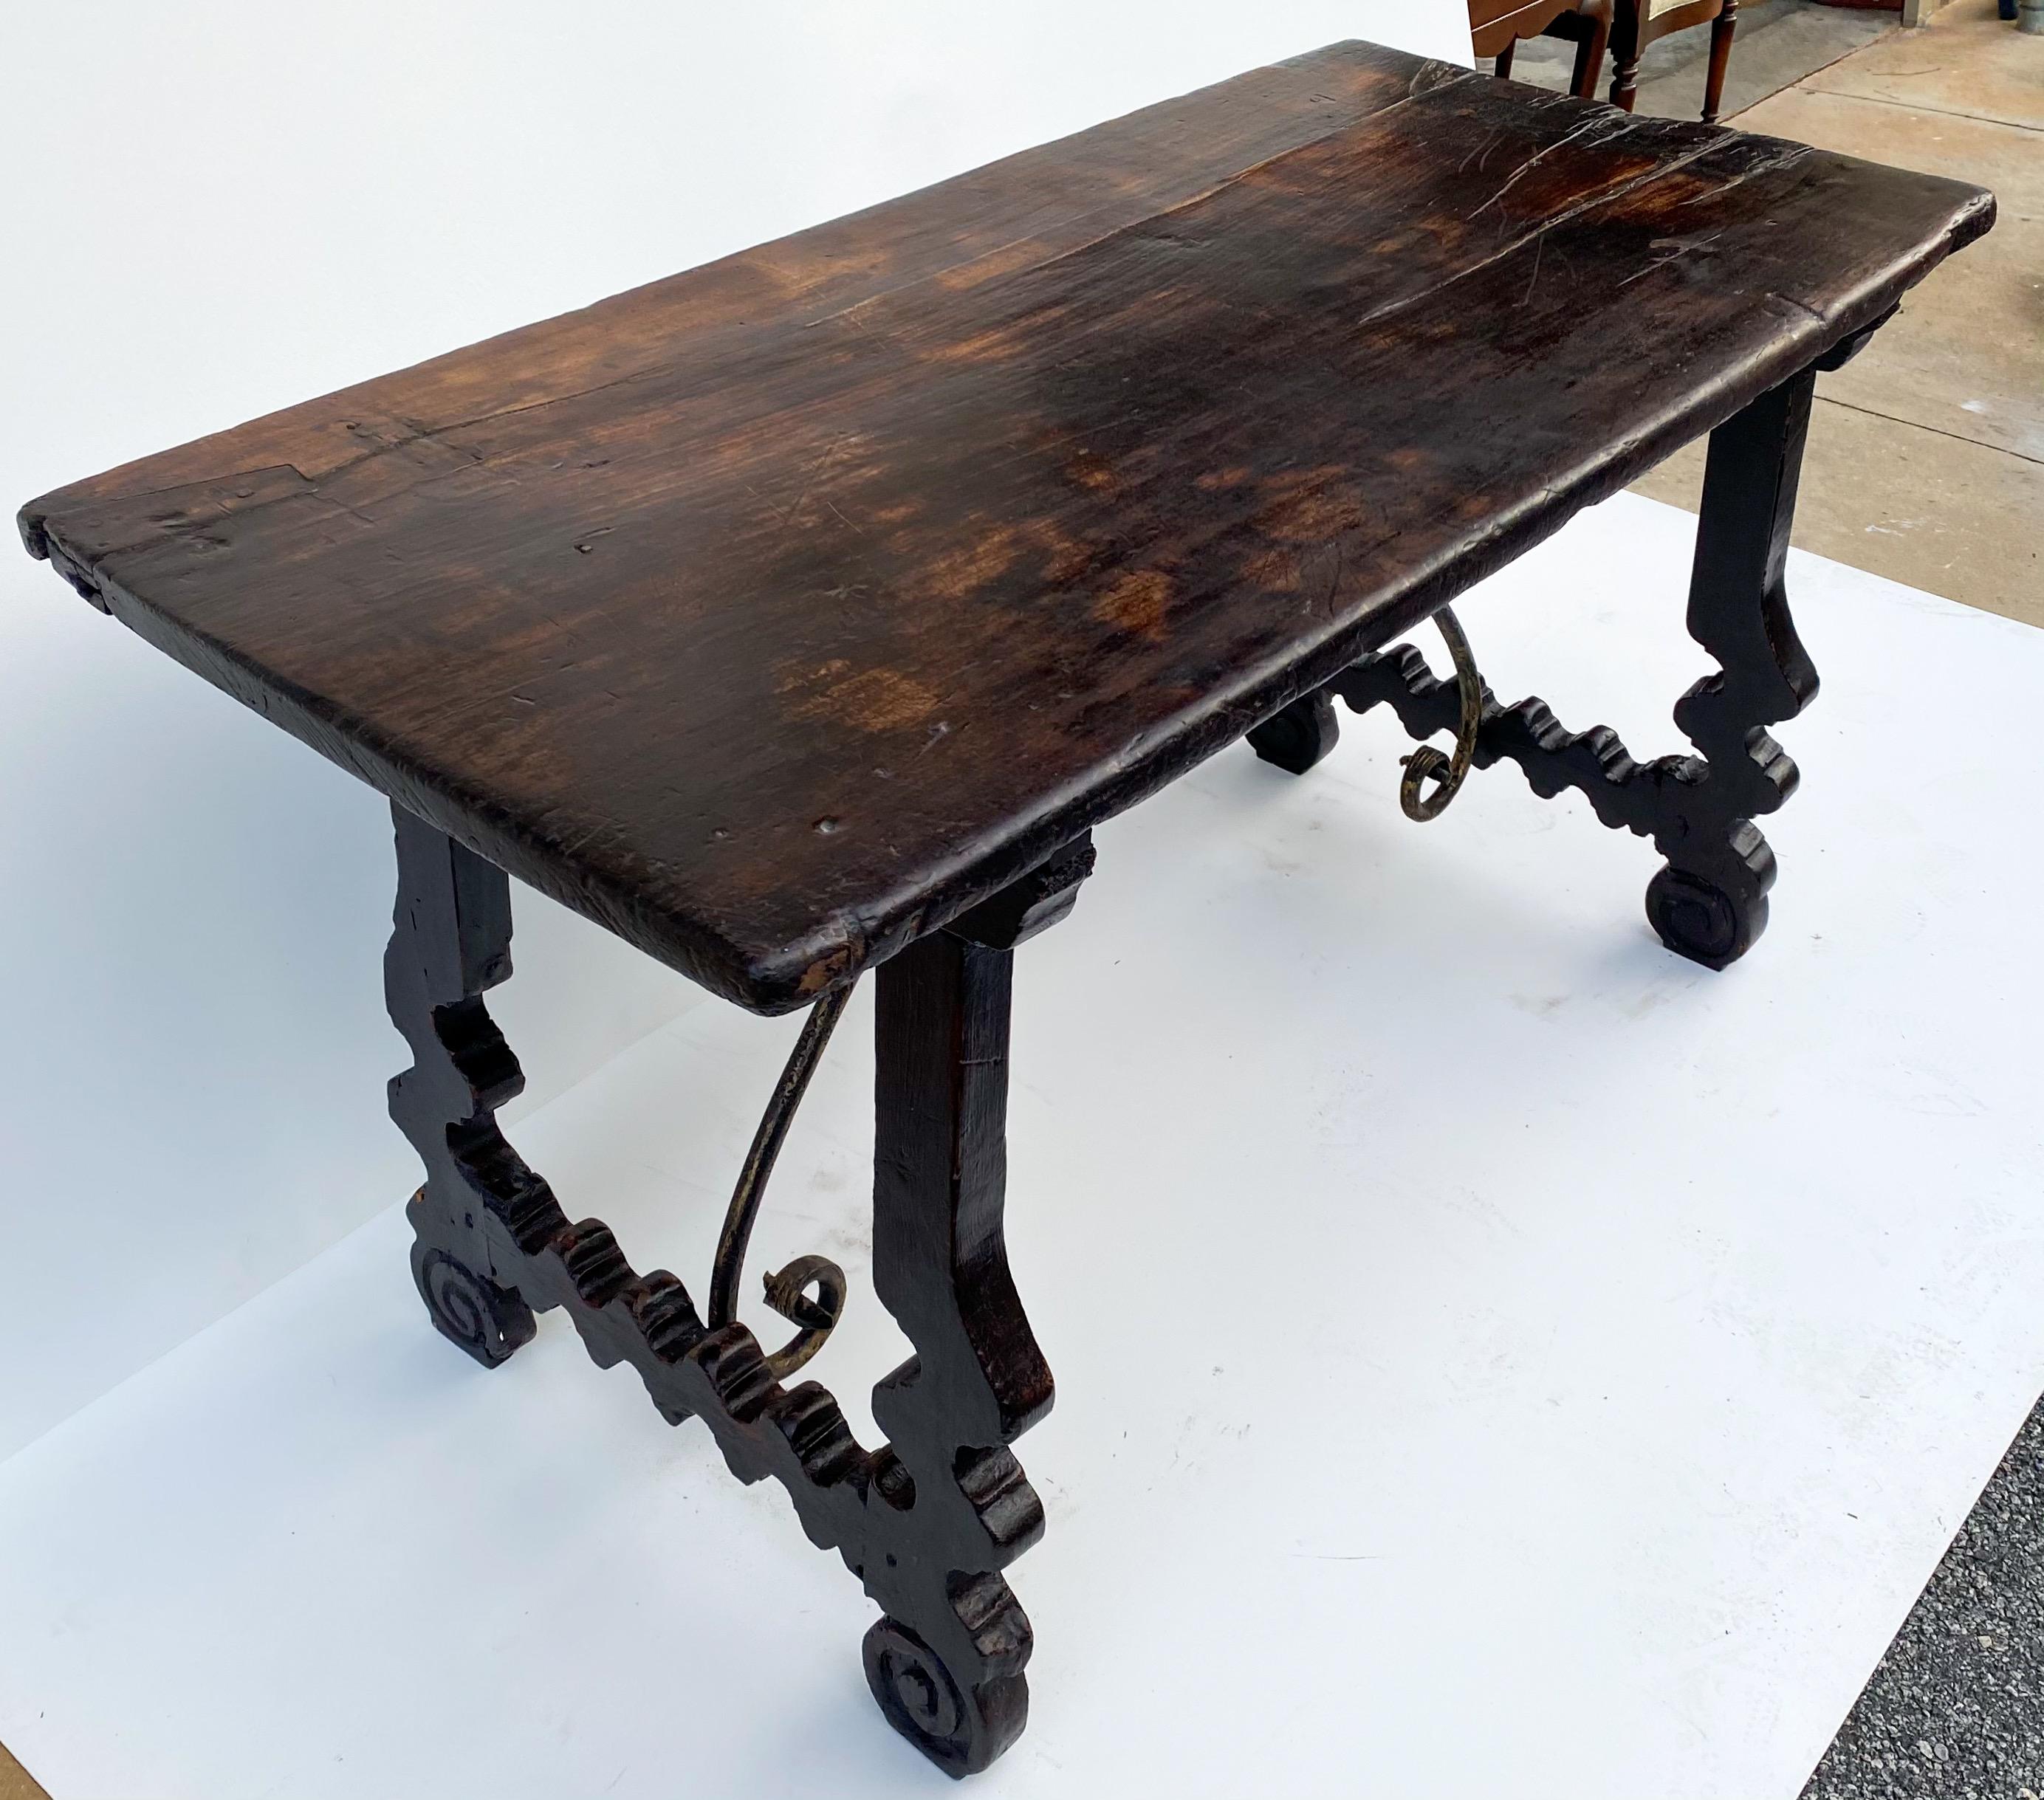 This is a 18th century Italian carved walnut table with iron stretcher. The walnut is single plank construction. The iron cross stretcher is hand forged. Great piece with age appropriate wear.